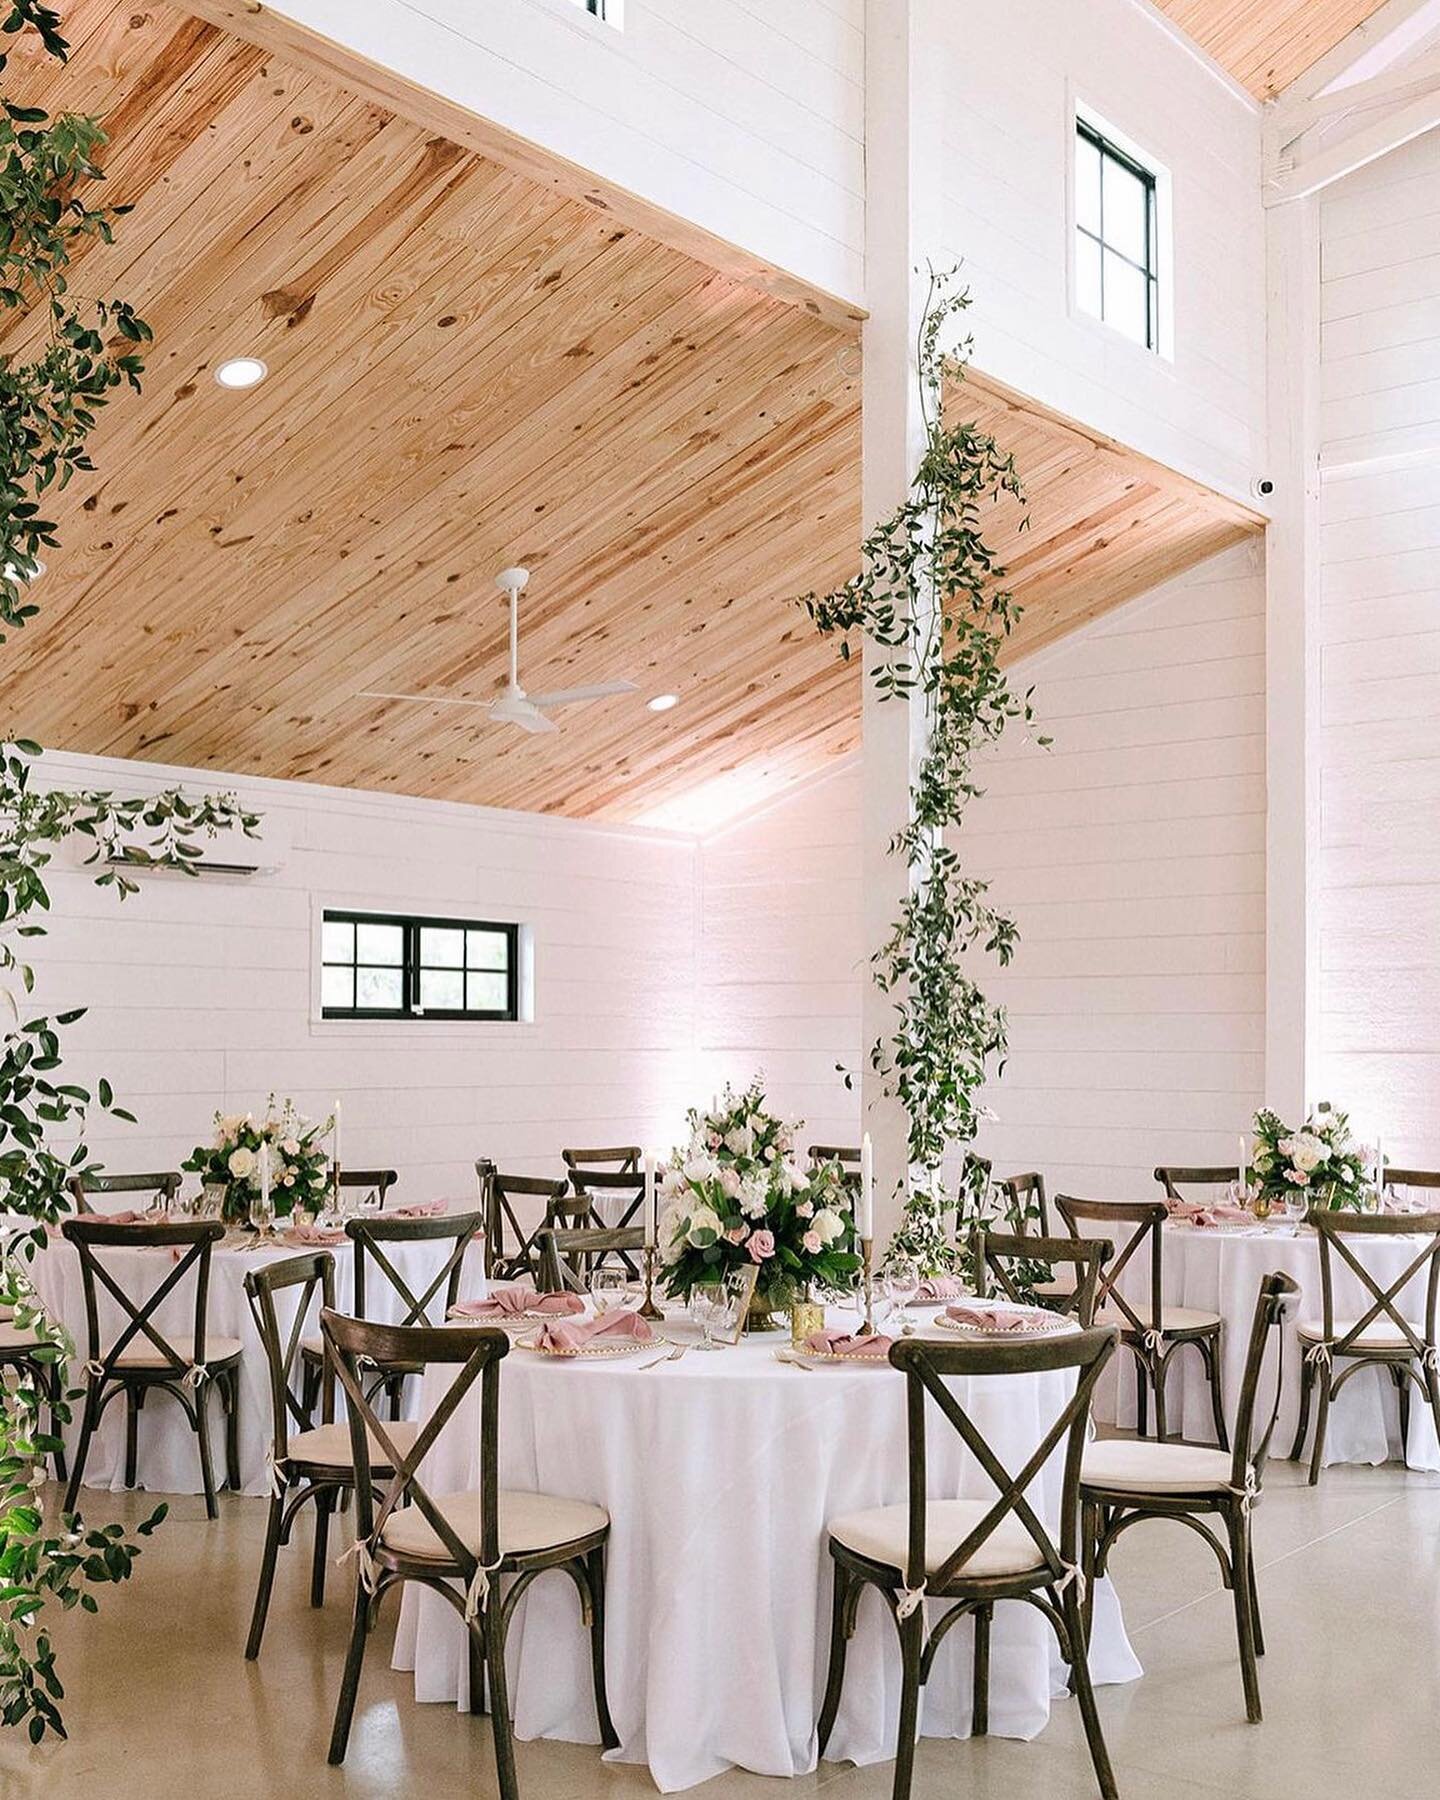 Authentic flowers really make a HUGE impact on the display of your wedding! Nicole and Thomas, you did very good with this one:)🤍🤩

Photos: @tiffanymaysonetphoto
Florals: @ideweventsflorals
&bull;
&bull;
&bull;

#Kingscrossingbarn #Godisgood #marri